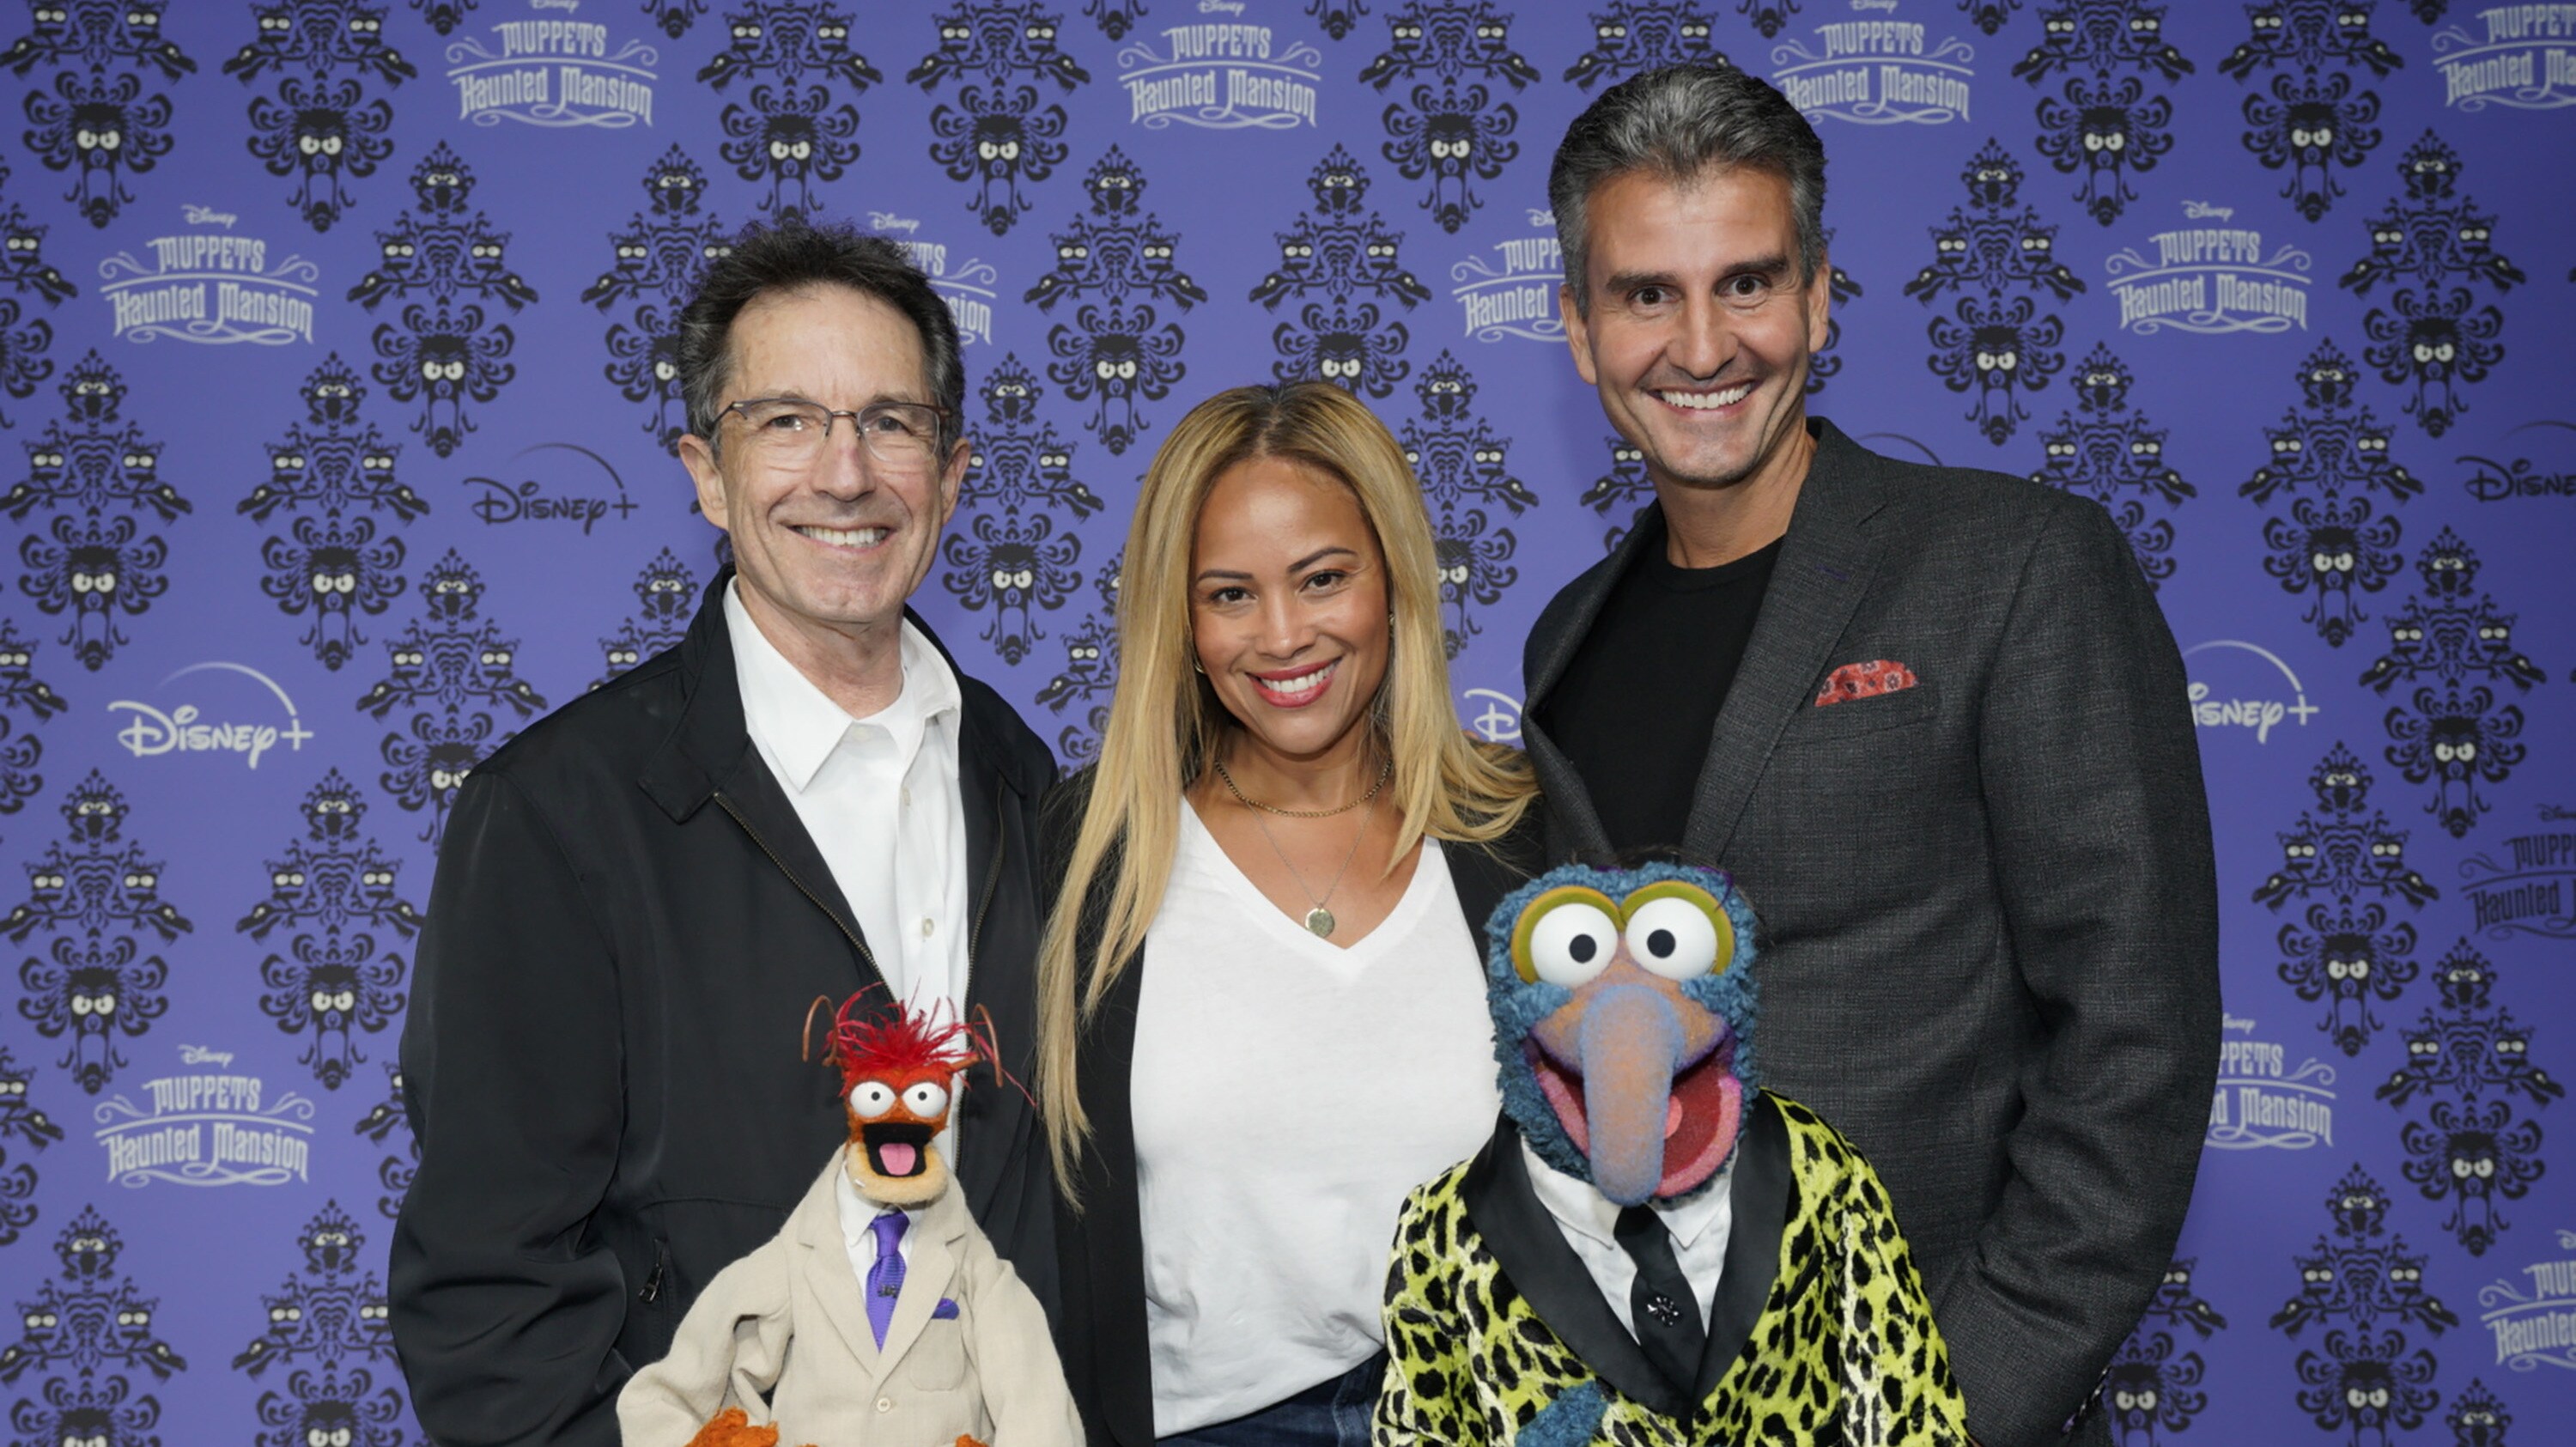 MUPPETS HAUNTED MANSION - Stars of The Muppets first-ever Halloween special "Muppets Haunted Mansion" attended the Drive-In Premiere Event at West Los Angeles College, Thursday, October 7. "Muppets Haunted Mansion" is available to stream Friday, October 8 on Disney+. (Disney/Jacqueline Jones) PEPE THE KING PRAWN, GARY MARSH (PRESIDENT & CCO, DISNEY BRANDED TELEVISION), AYO DAVIS (PRESIDENT, DISNEY BRANDED TELEVISION), GONZO, JOSH D’AMARO (CHAIRMAN OF DISNEY PARKS, EXPERIENCES AND PRODUCTS)